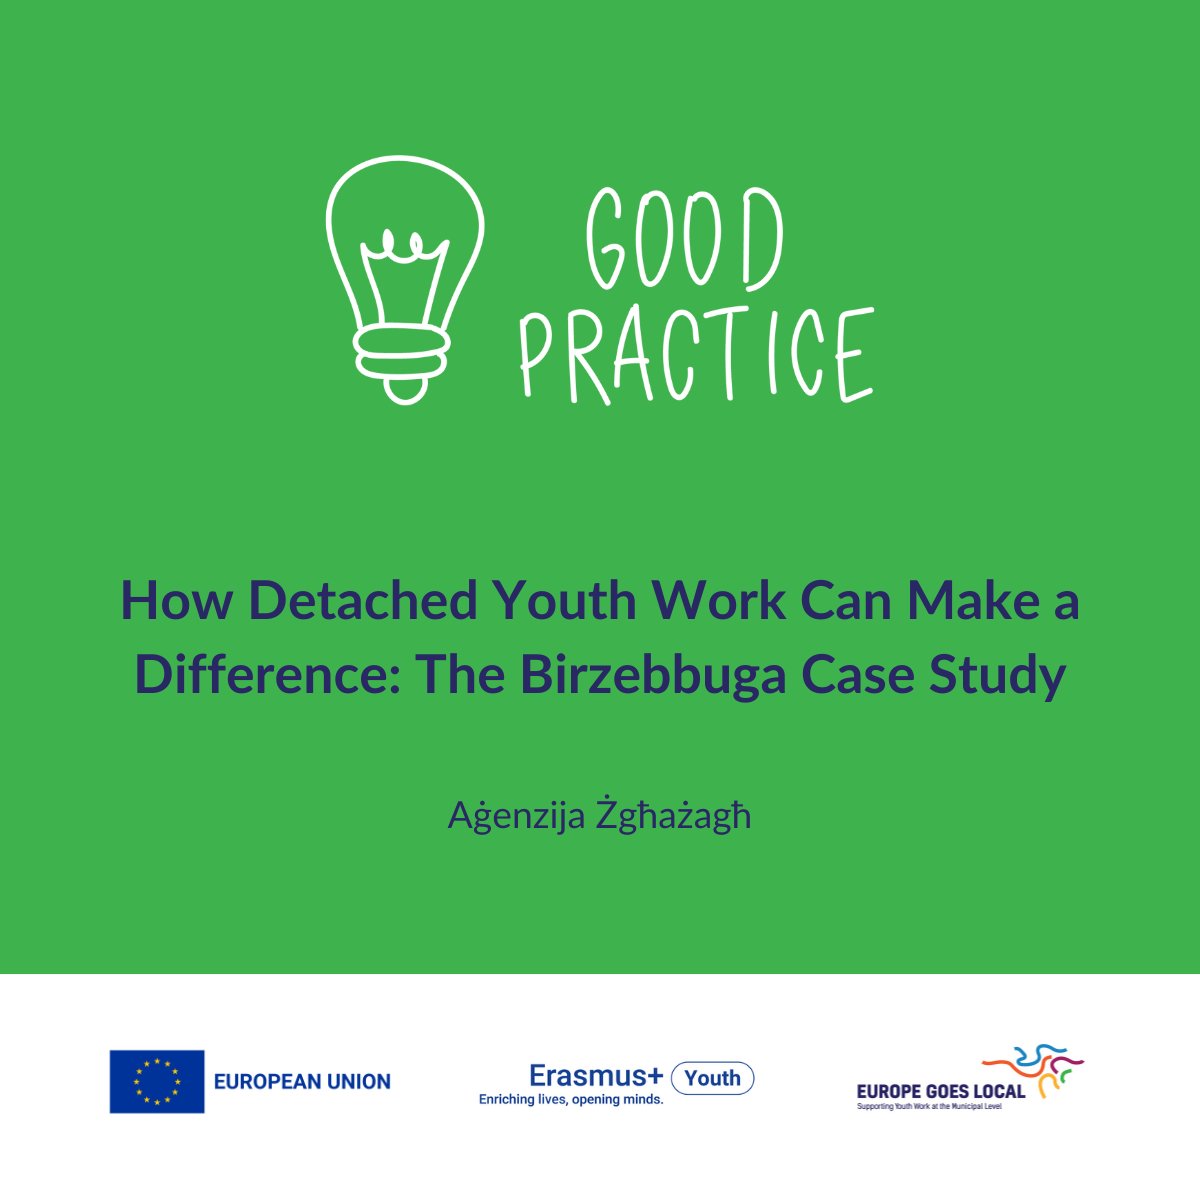 Discover the inspiring case study of Birżebbuġa🇲🇹, one of the localities where the Aġenzija Żgħażagħ youth workers responded to a prominent need from the young people there and how they made it a reality: europegoeslocal.eu/good-practice-… #detachedyouthwork